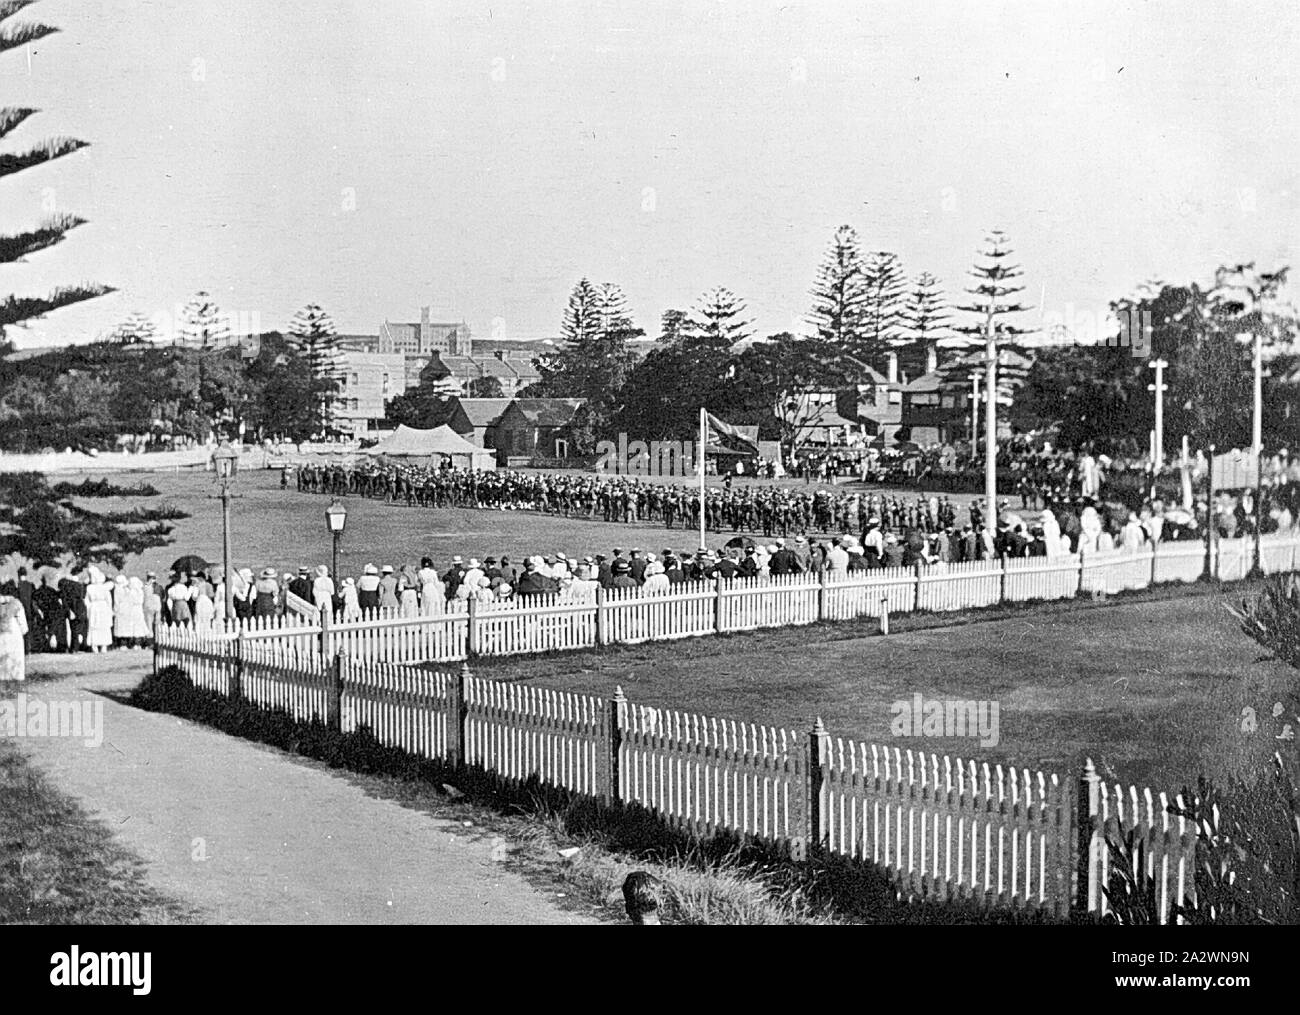 Negative - Band Contest at a Sports Ground, Manly, New South Wales, 1915, A band contest at a sports ground Stock Photo